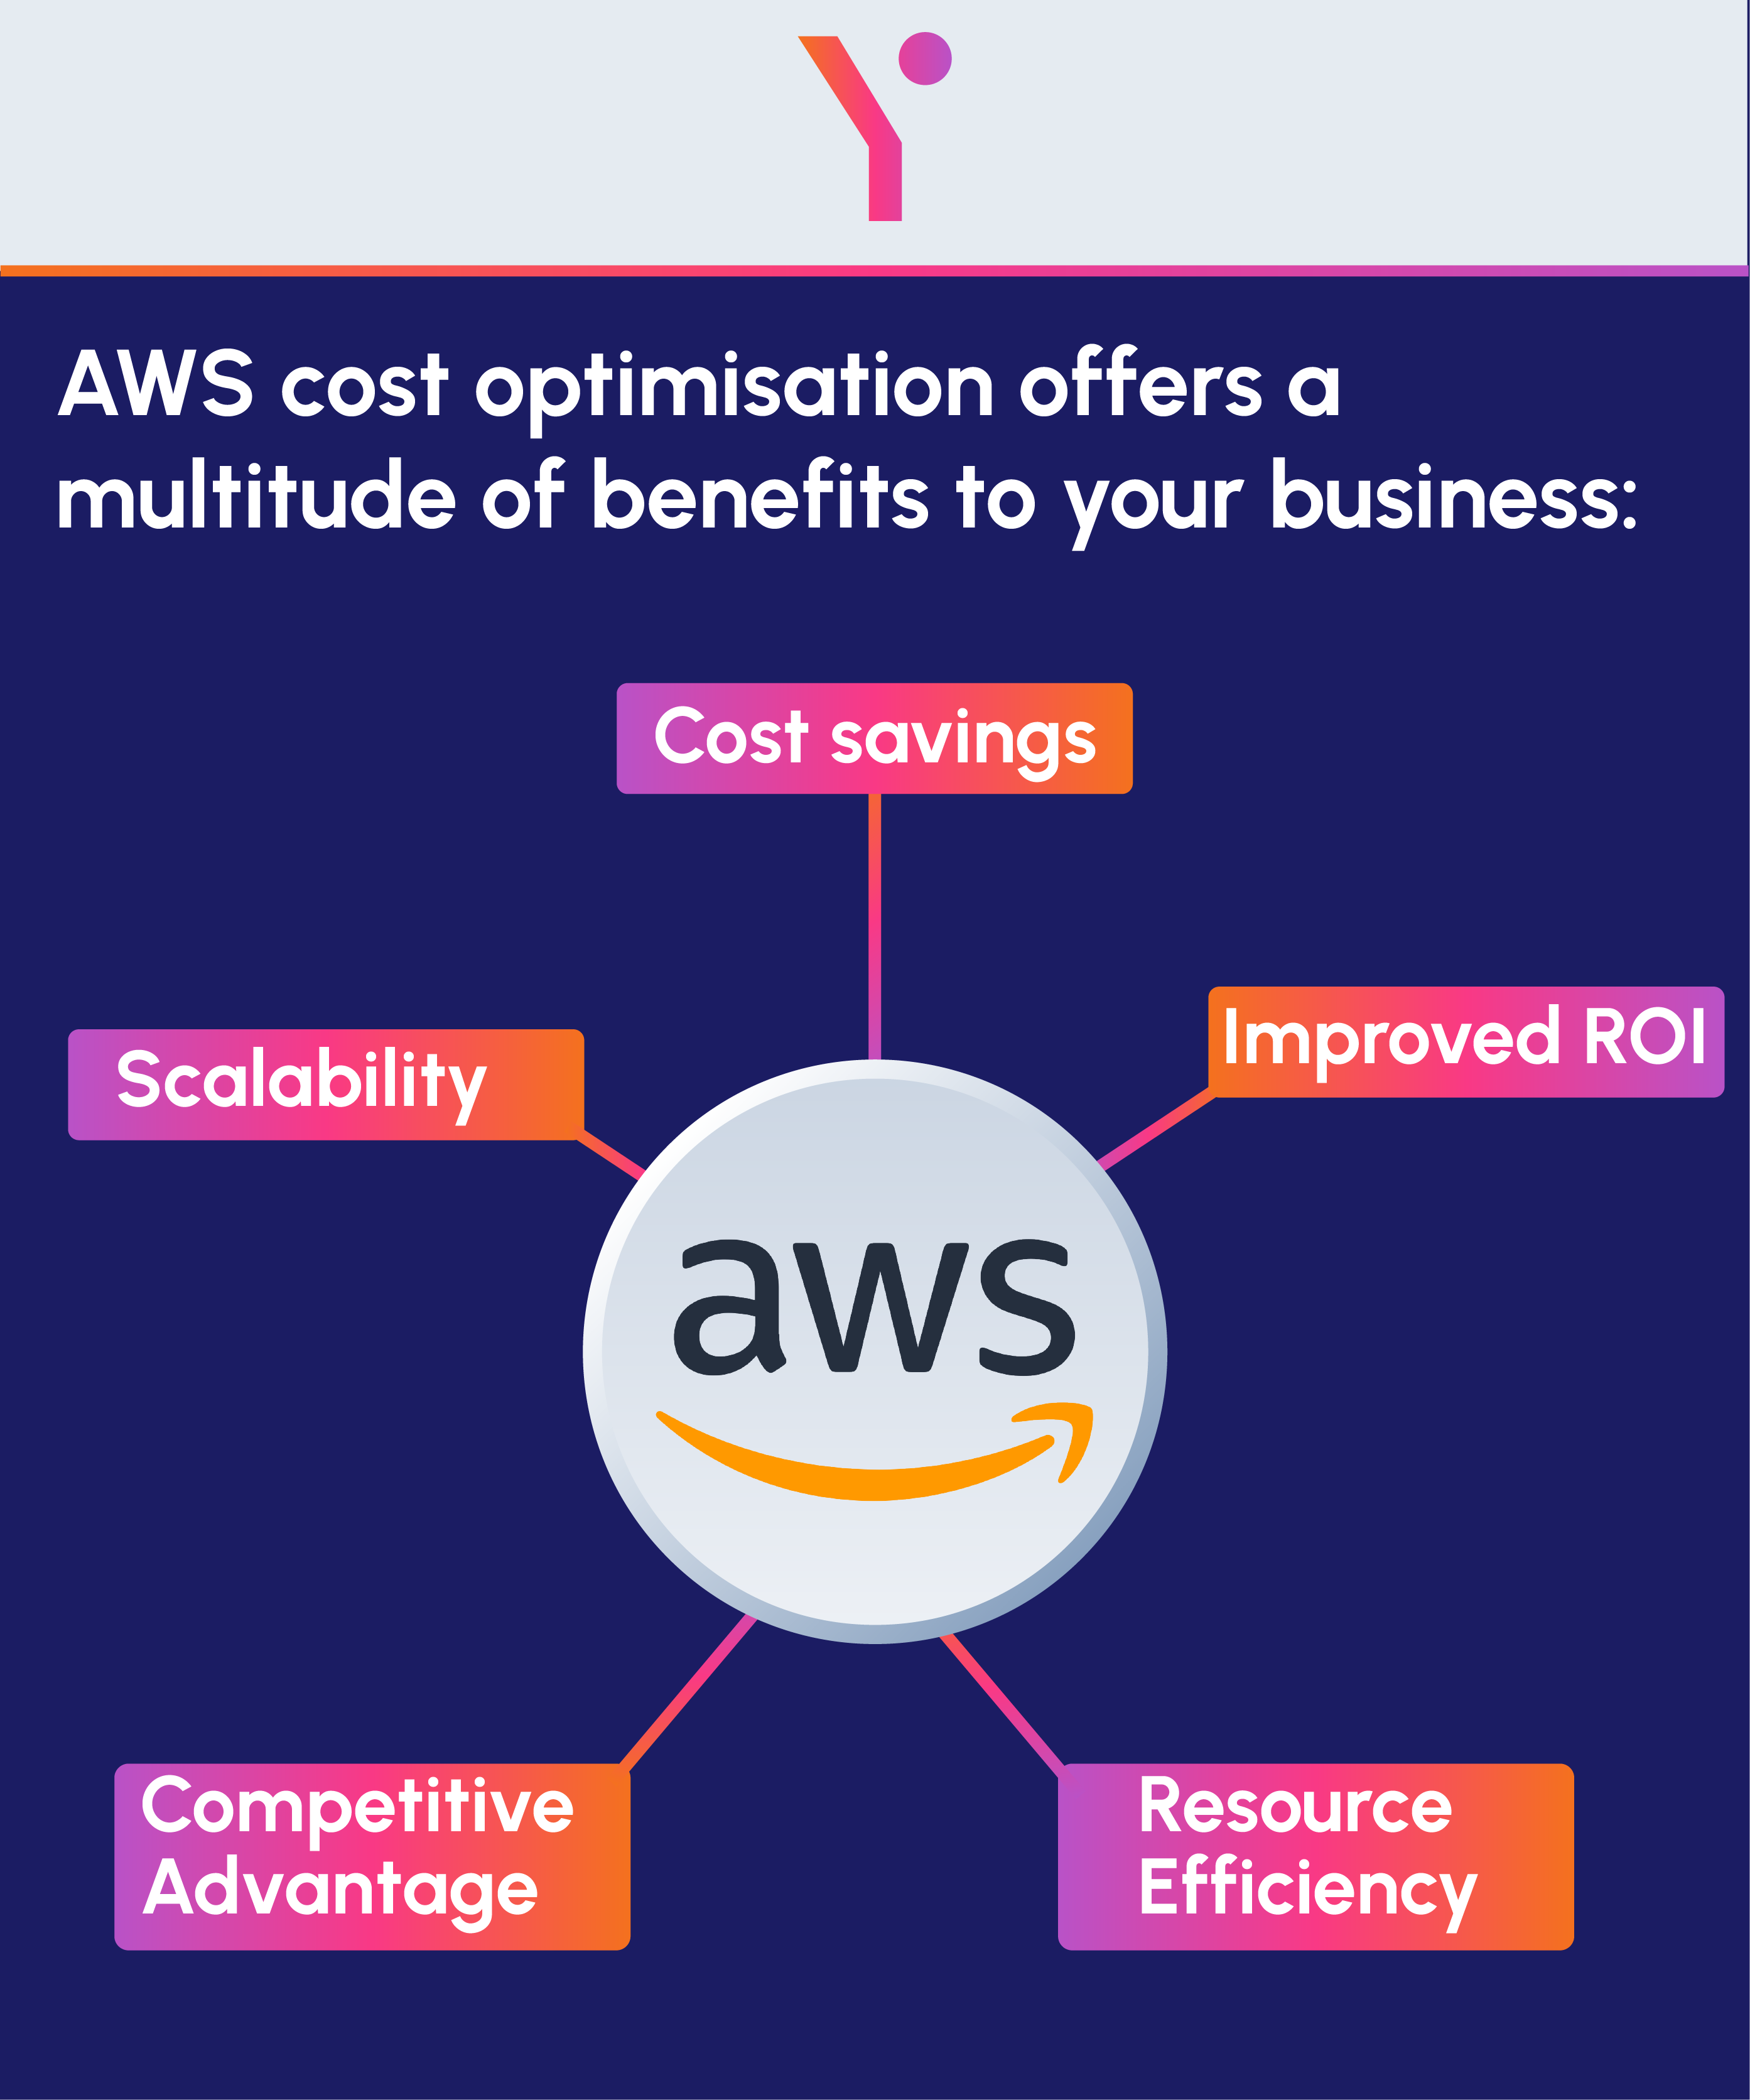 Key pointers of aws cost optimization in pictorial form